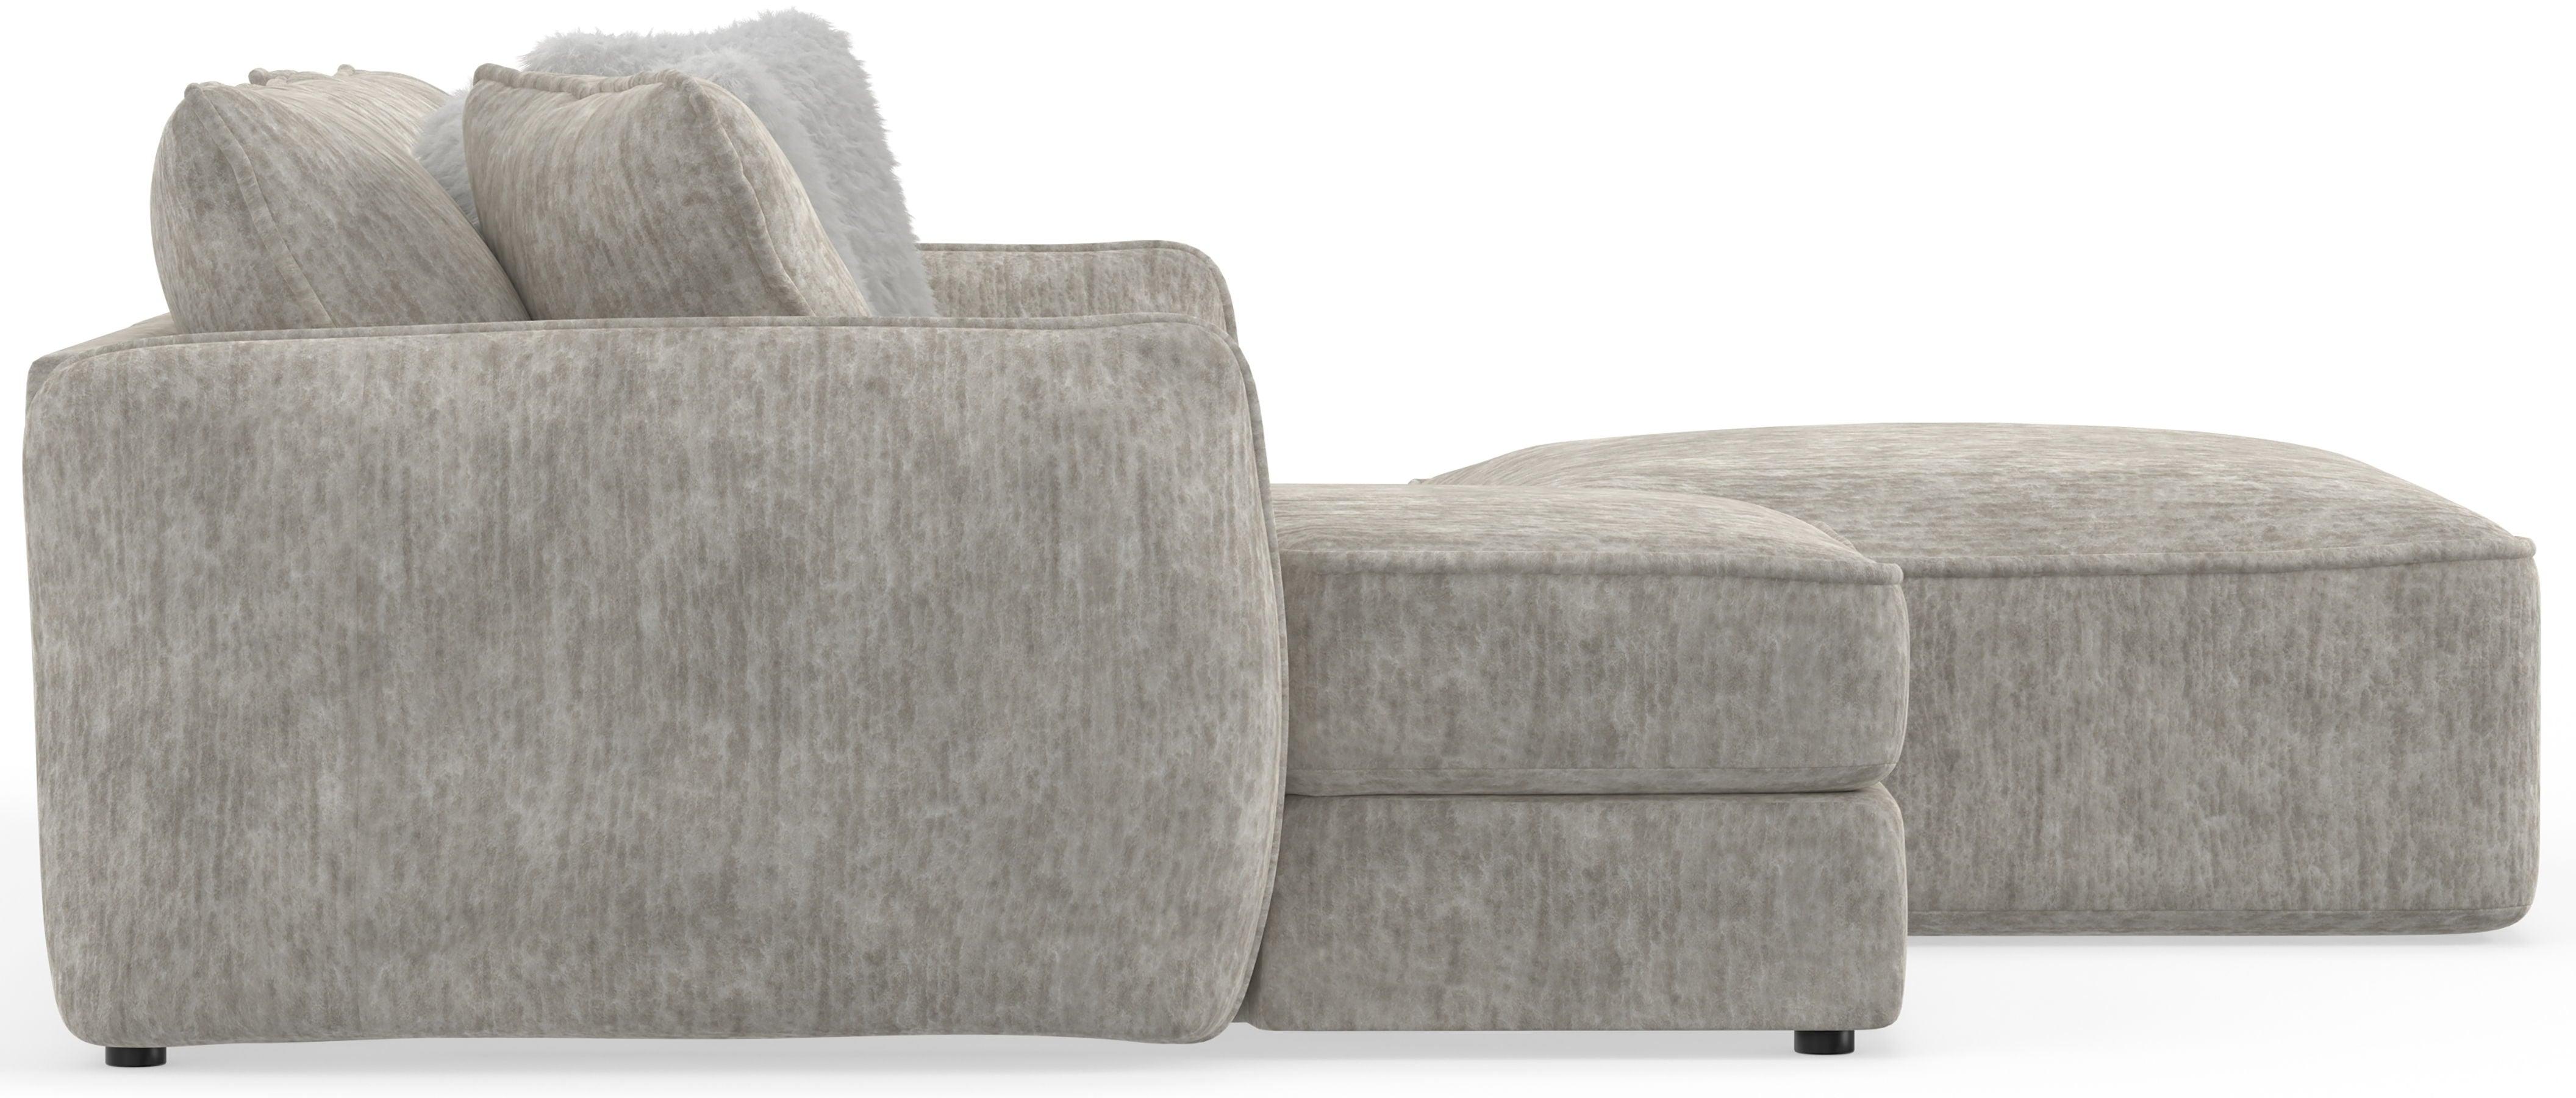 Jackson - Bucktown - 2 Piece Sofa / Chaise With Extra Thick Cuddler Seat Cushions & Cocktail Ottoman - 5th Avenue Furniture